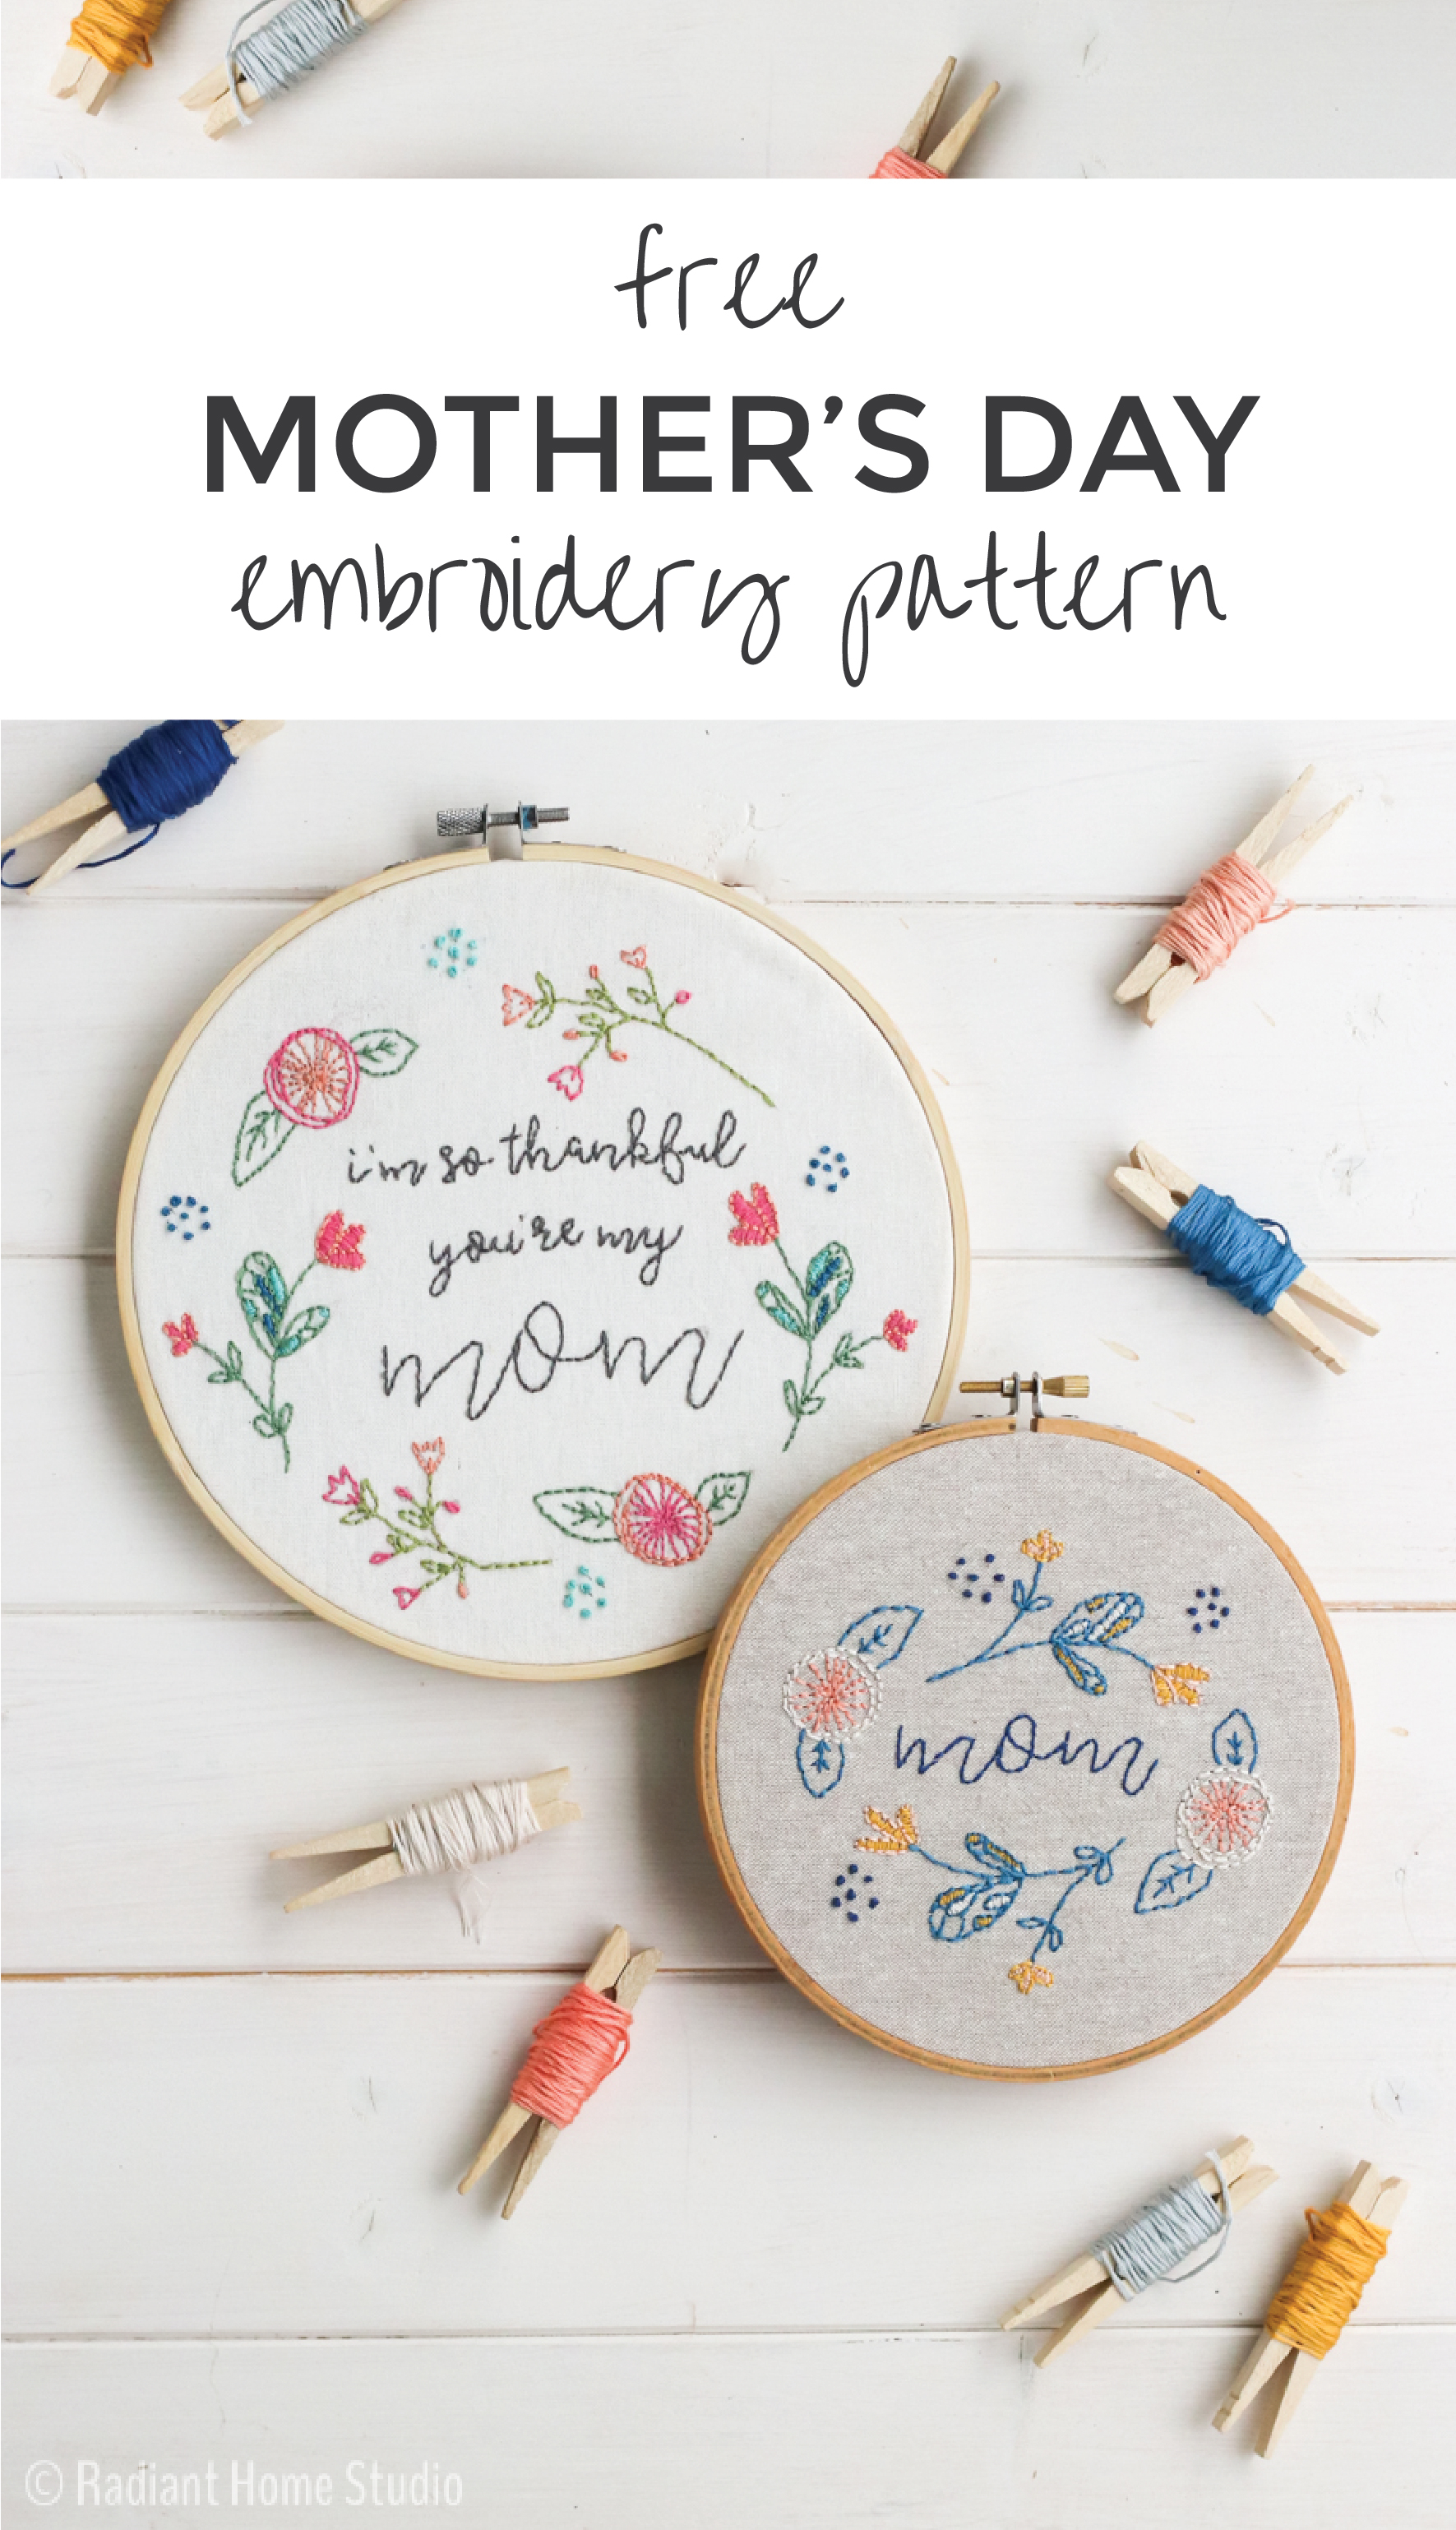 Embroidery Patterns Free Free Mothers Day Embroidery Pattern Radiant Home Studio